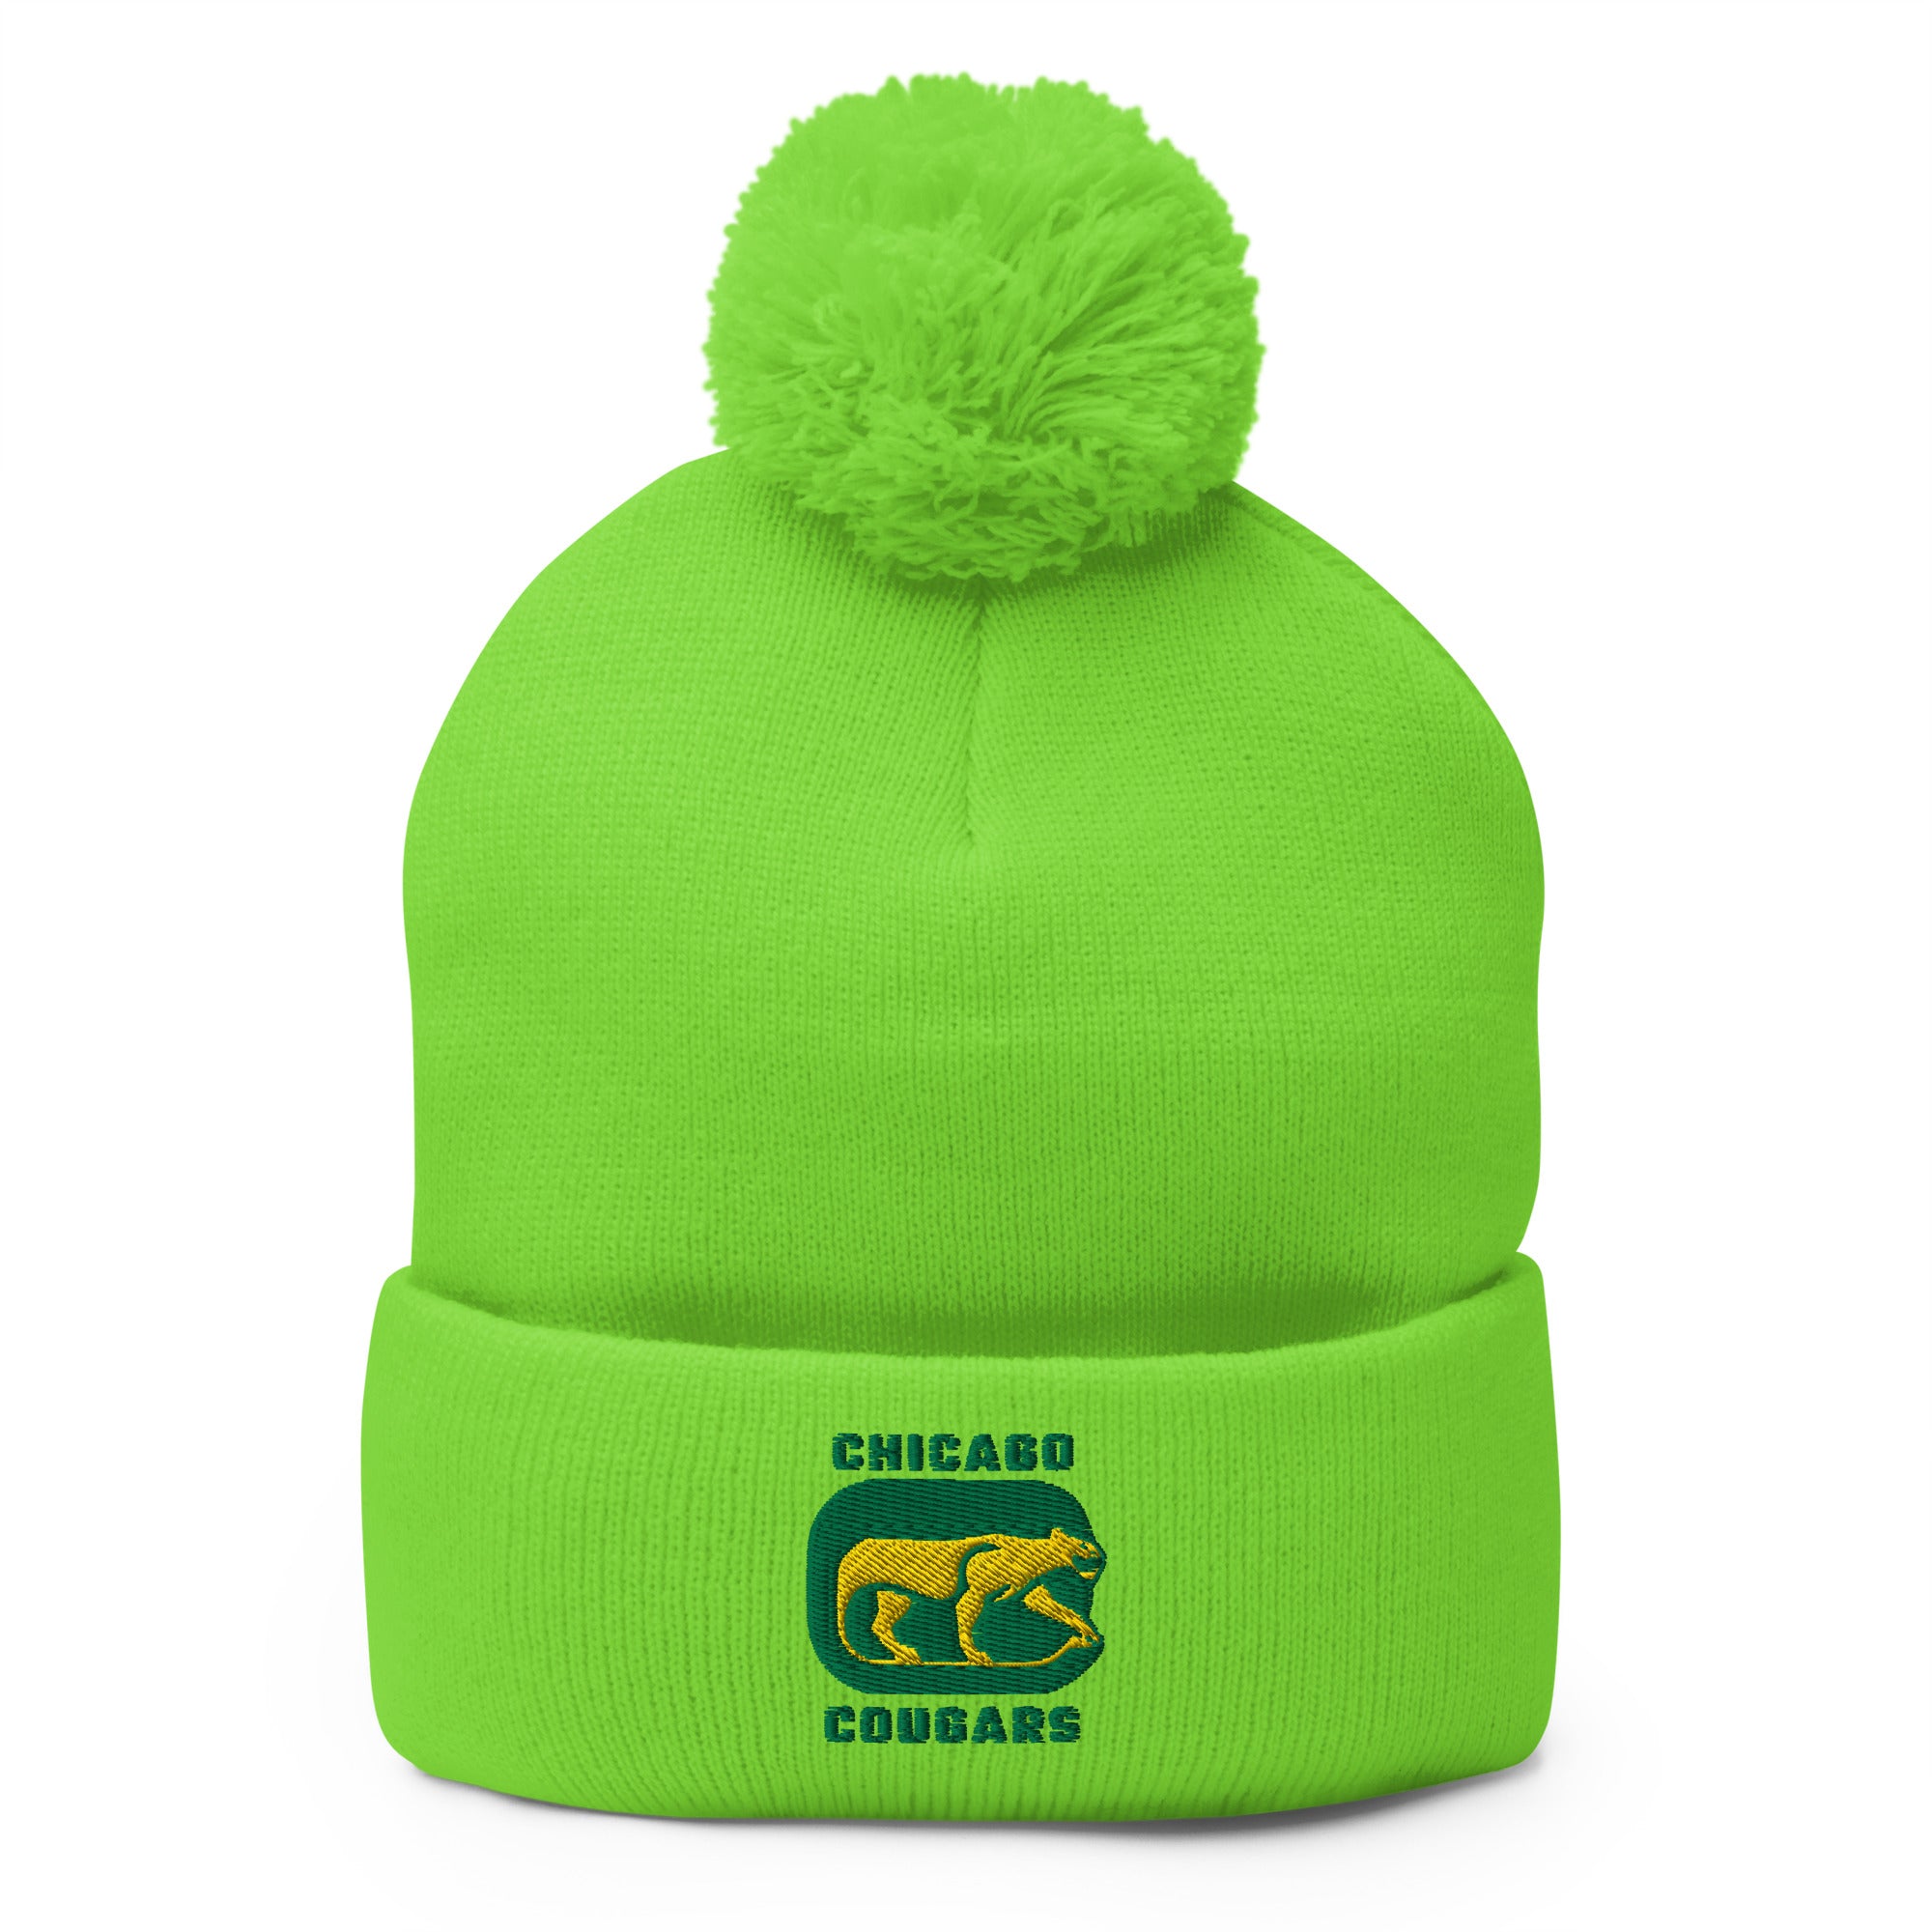 Chicago Cougars Beanie